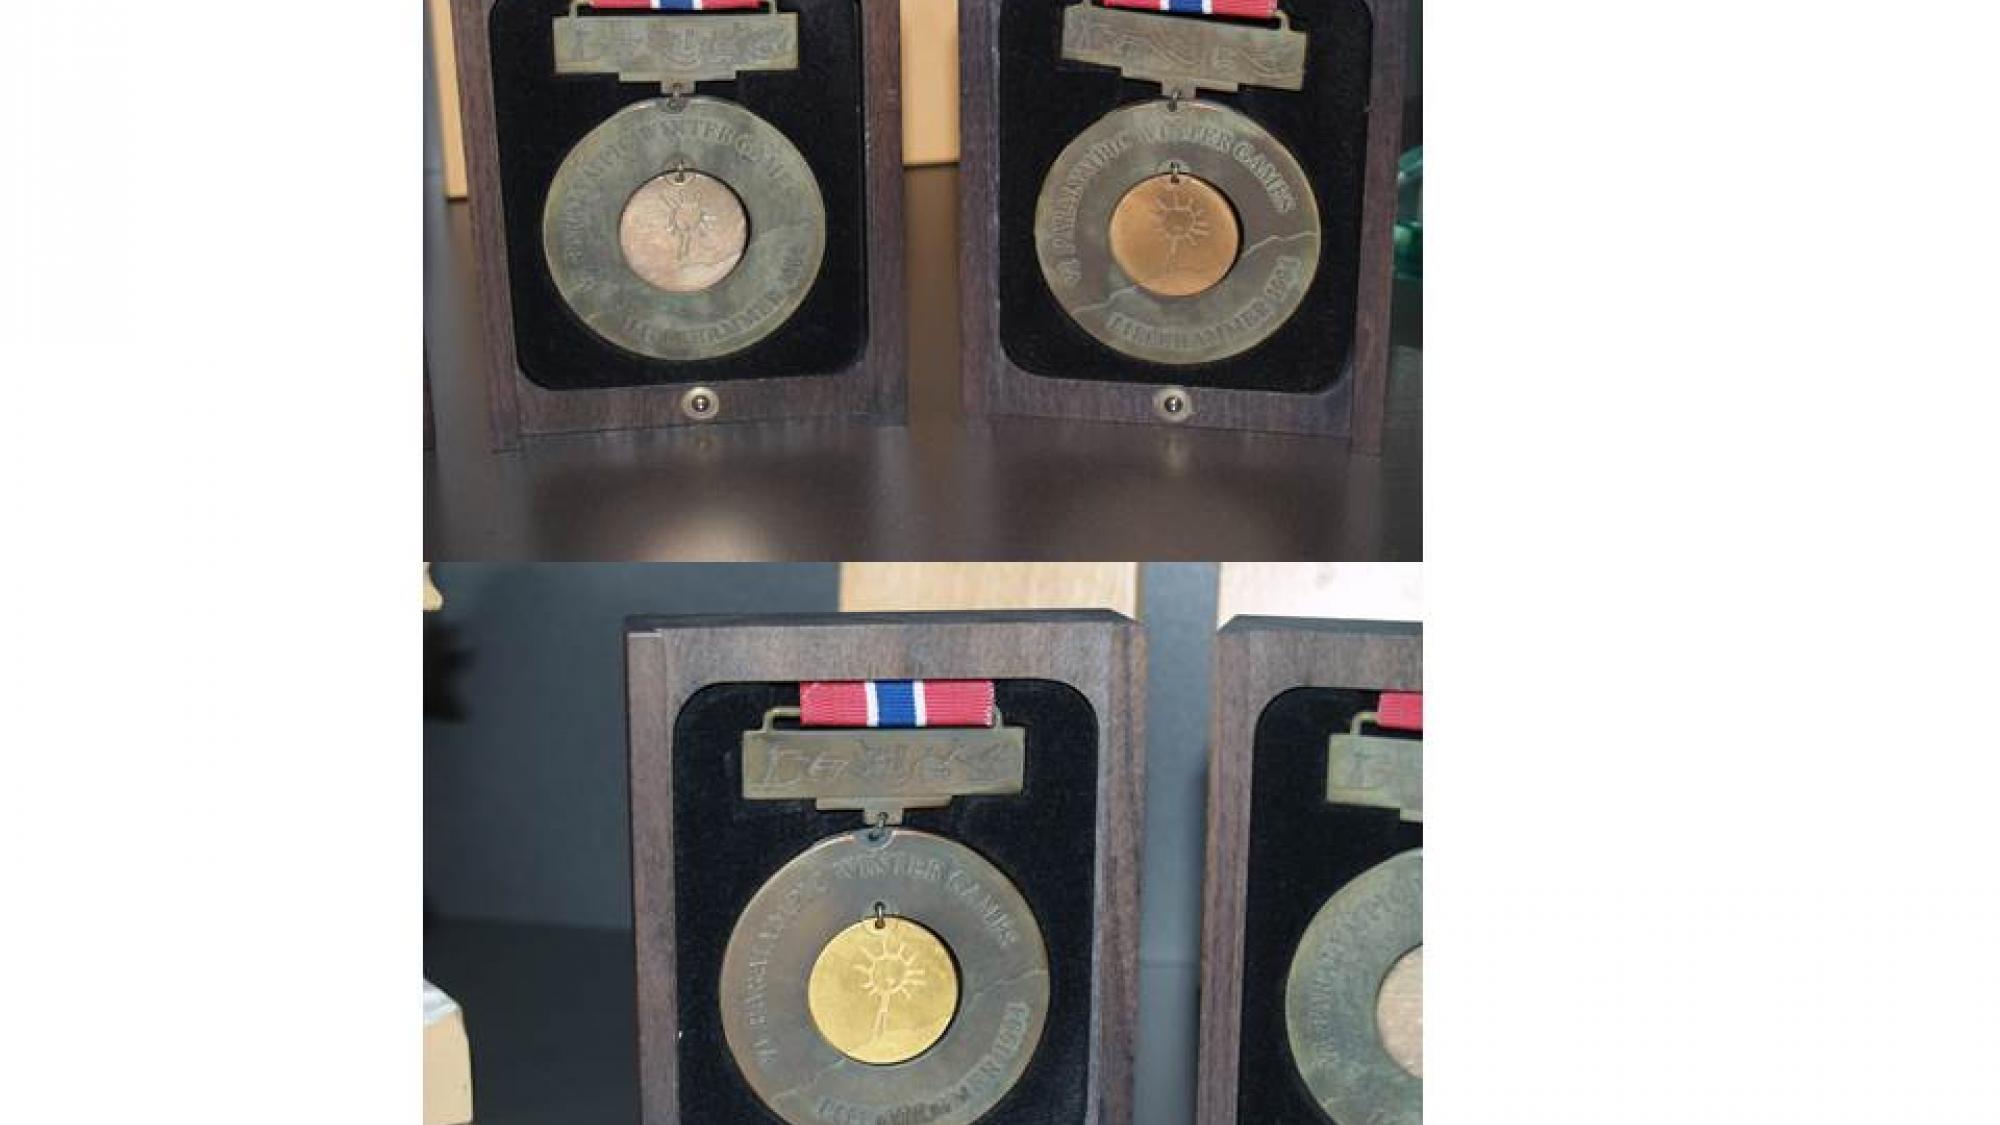 The medals of the Lillehammer 1994 Paralympic Winter Games